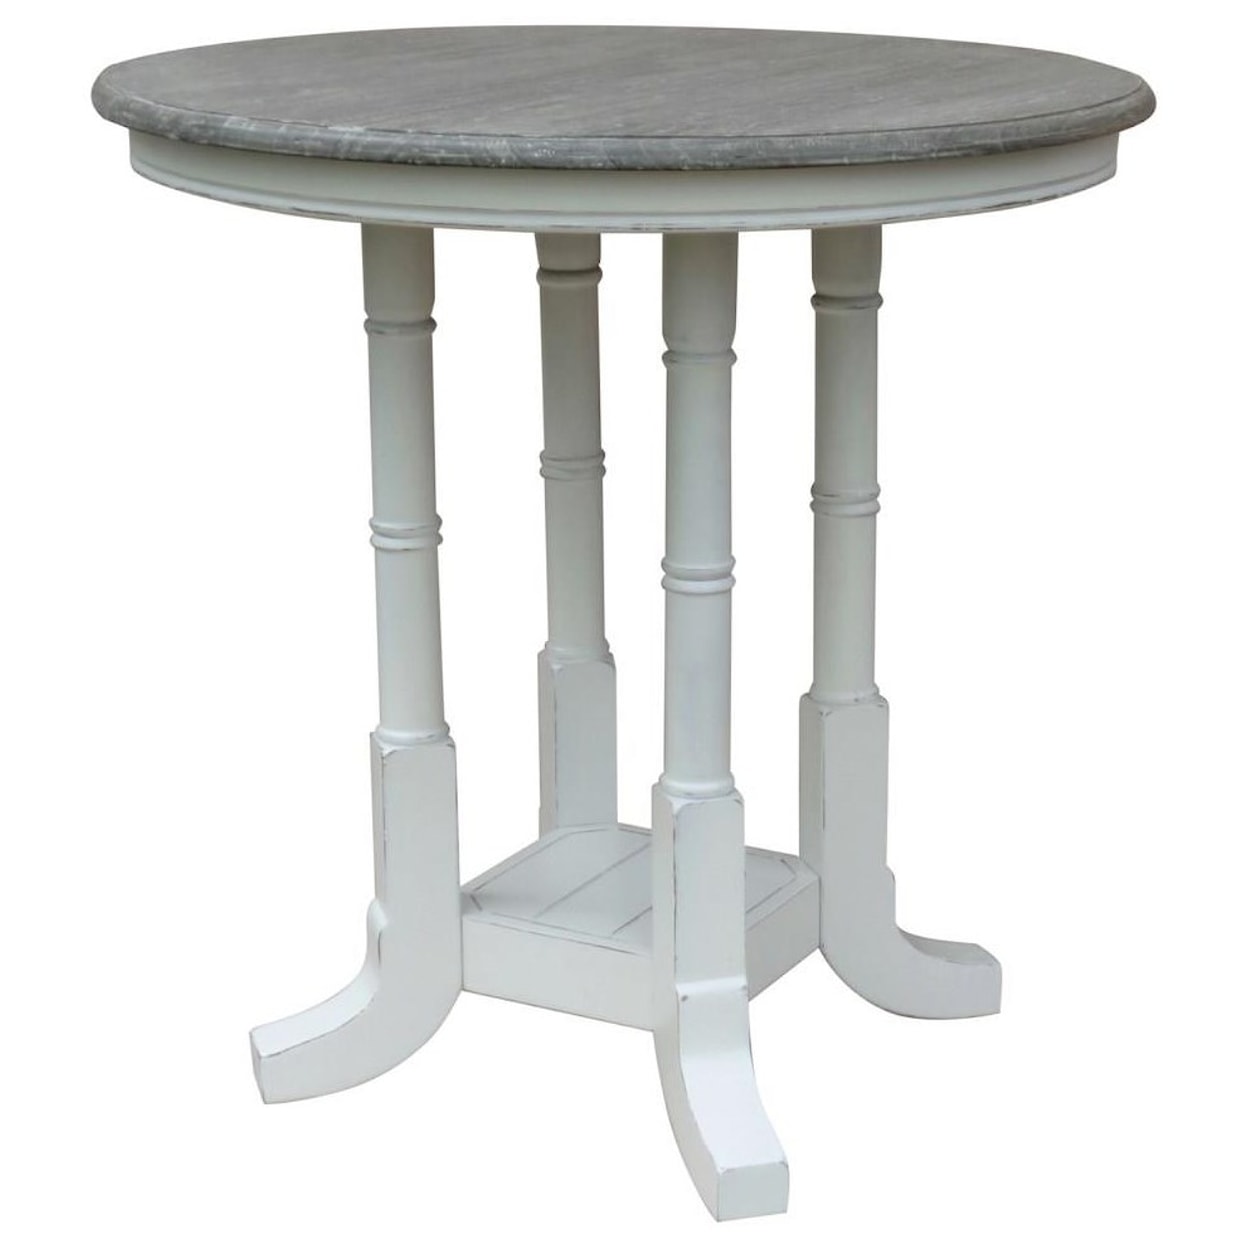 Trade Winds Furniture Casual Dining Island Gathering Pub Table